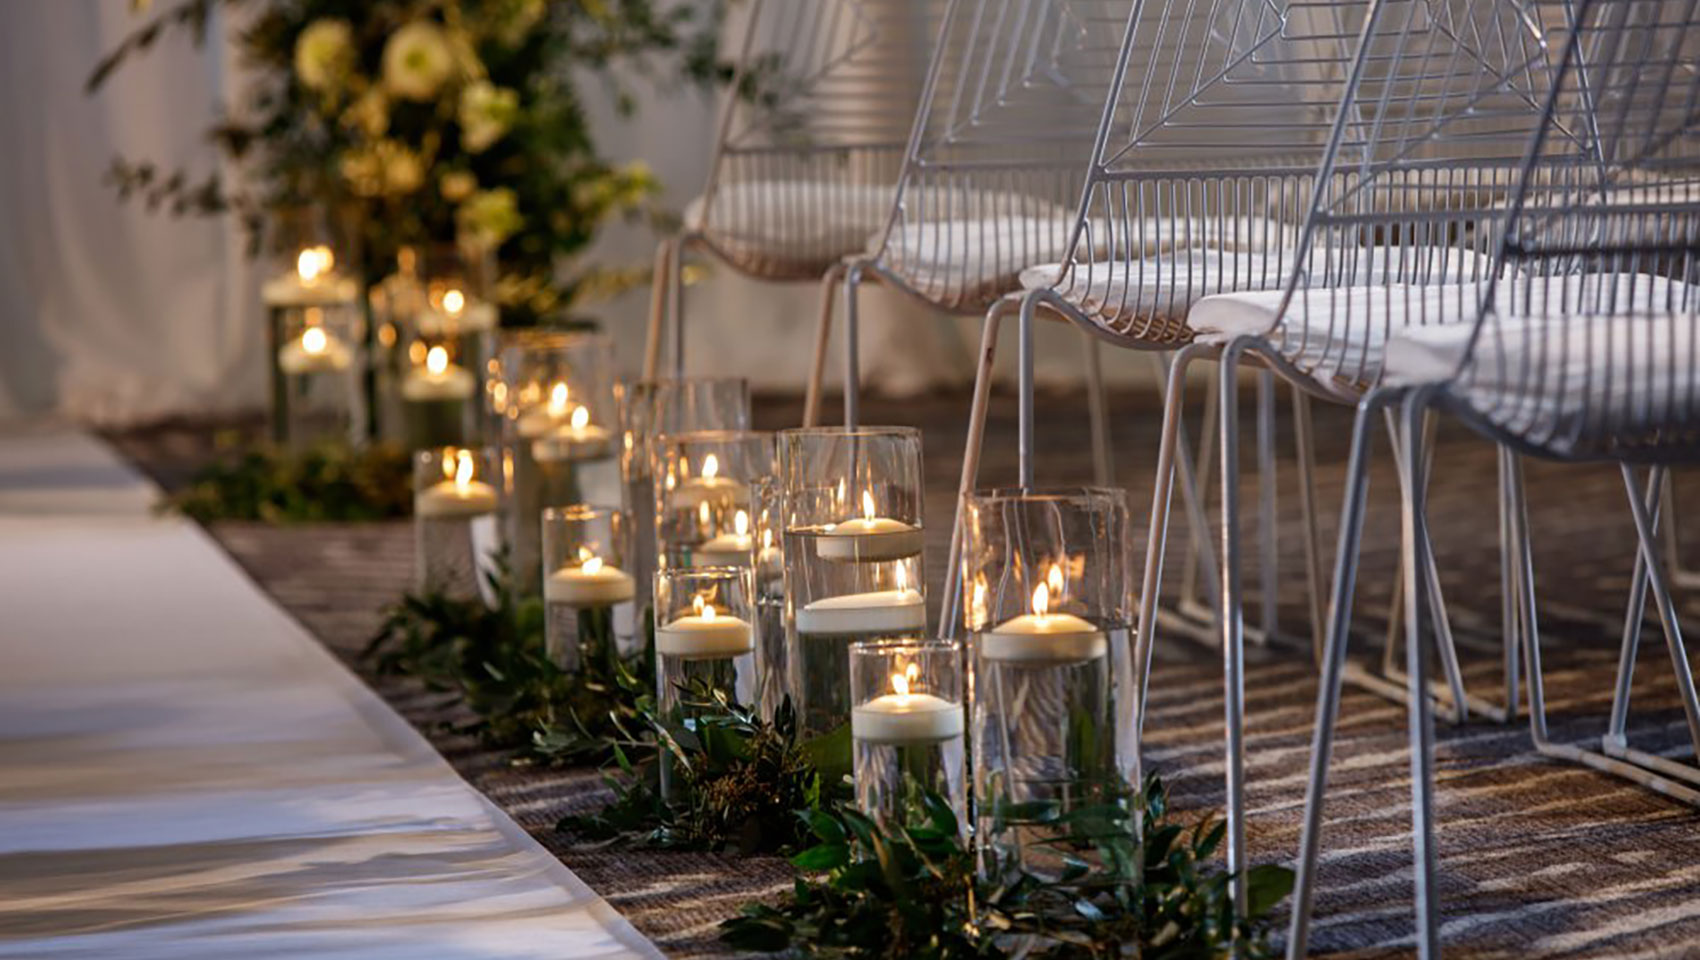 wedding guest chairs and candle floral decorations